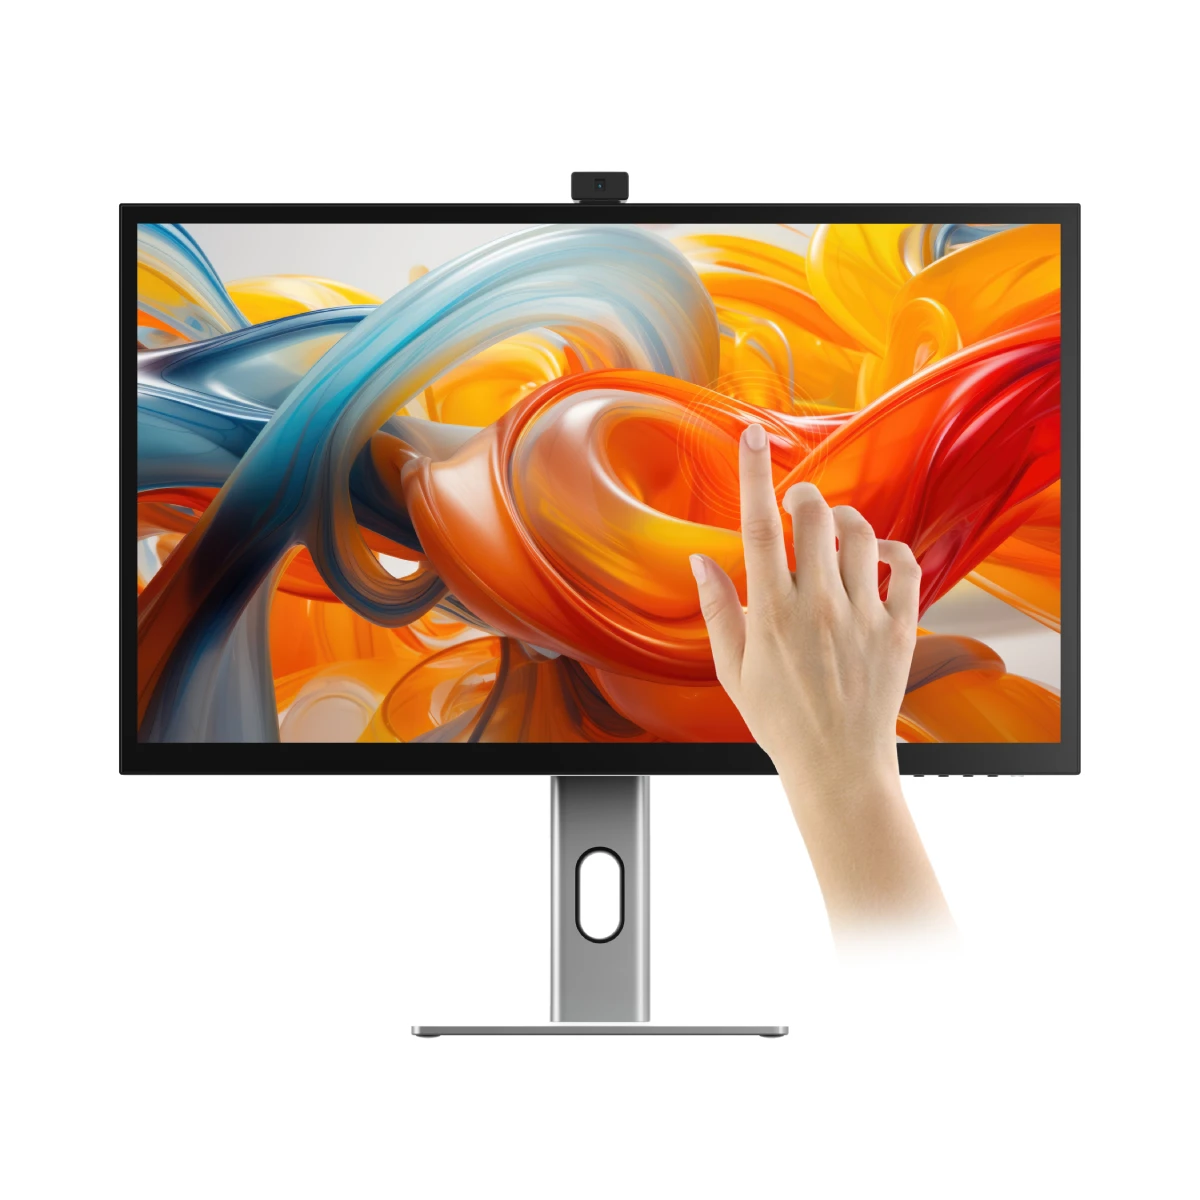 clarity-pro-touch-27-uhd-4k-monitor-with-65w-pd-webcam-and-touchscreen-pack-of-2-dual-4k-universal-docking-station-displayport-edition_7